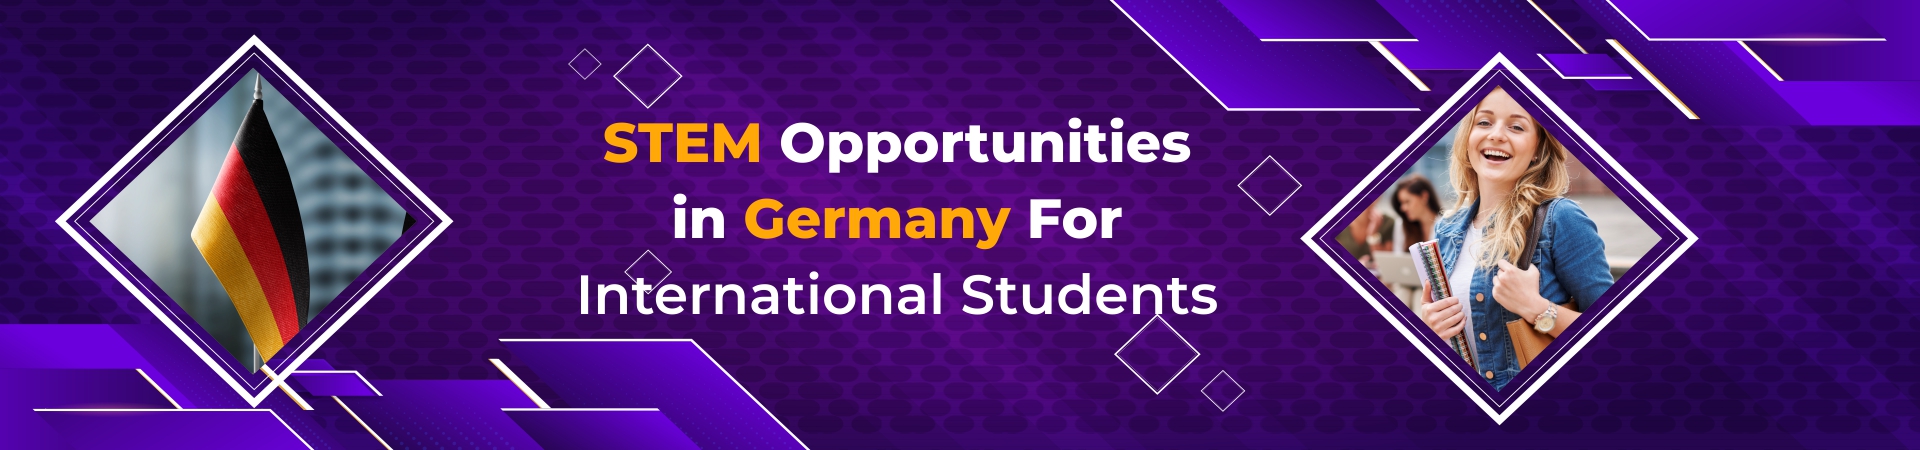 STEM Opportunities in Germany For International Students